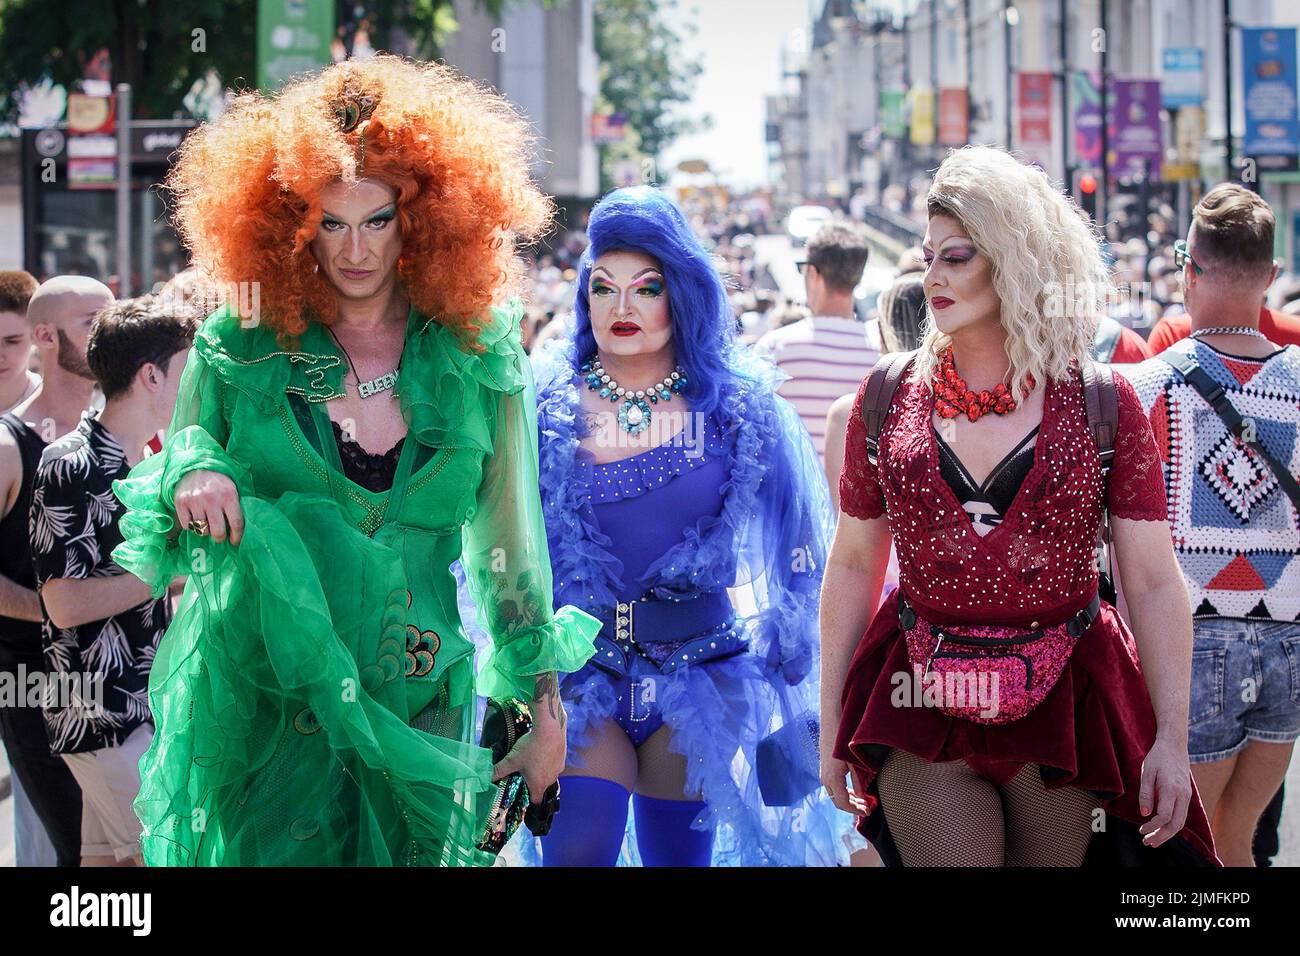 East Sussex, UK. 6th August 2022. Brighton and Hove Pride 2022. Three performing Drag Queens walk through the city centre. Thousands attend the annual LGBT+ celebration march from Hove Lawns to Preston Park. Credit: Guy Corbishley/Alamy Live News Stock Photo